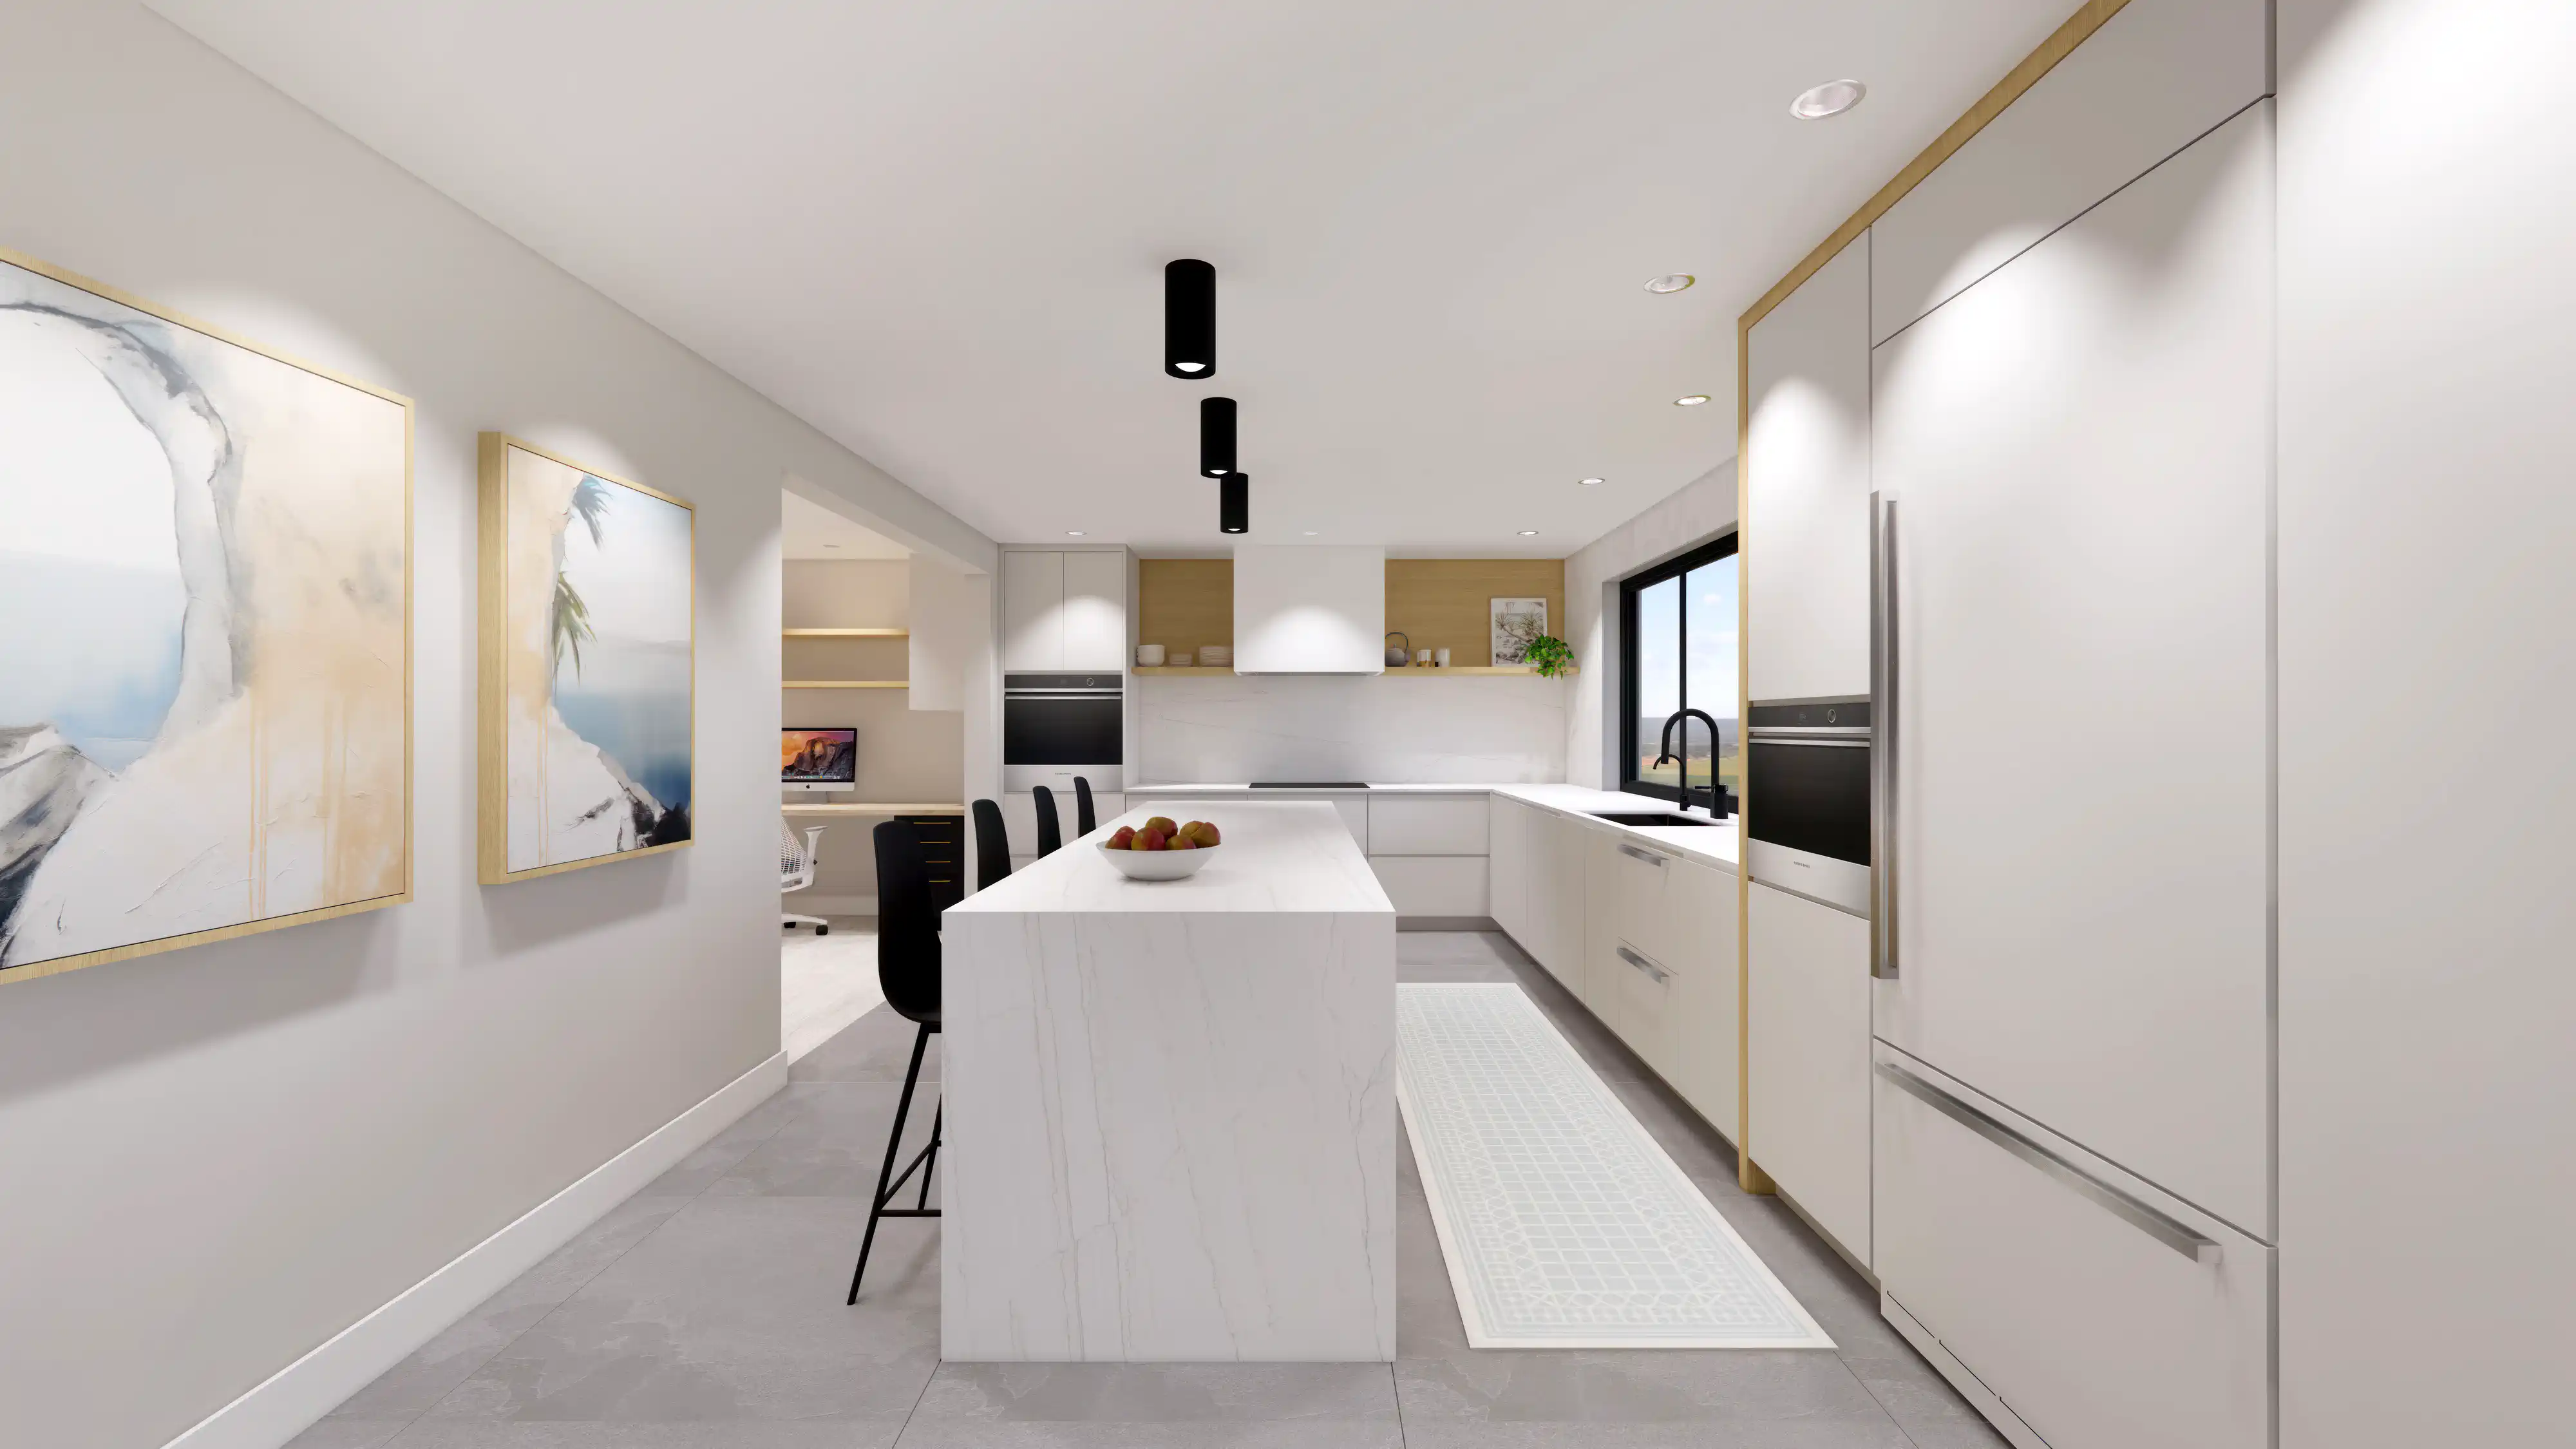 3D rendering of a modern kitchen interior with marble island, modern fixtures, and framed artwork, interior by Sarah Brown Design